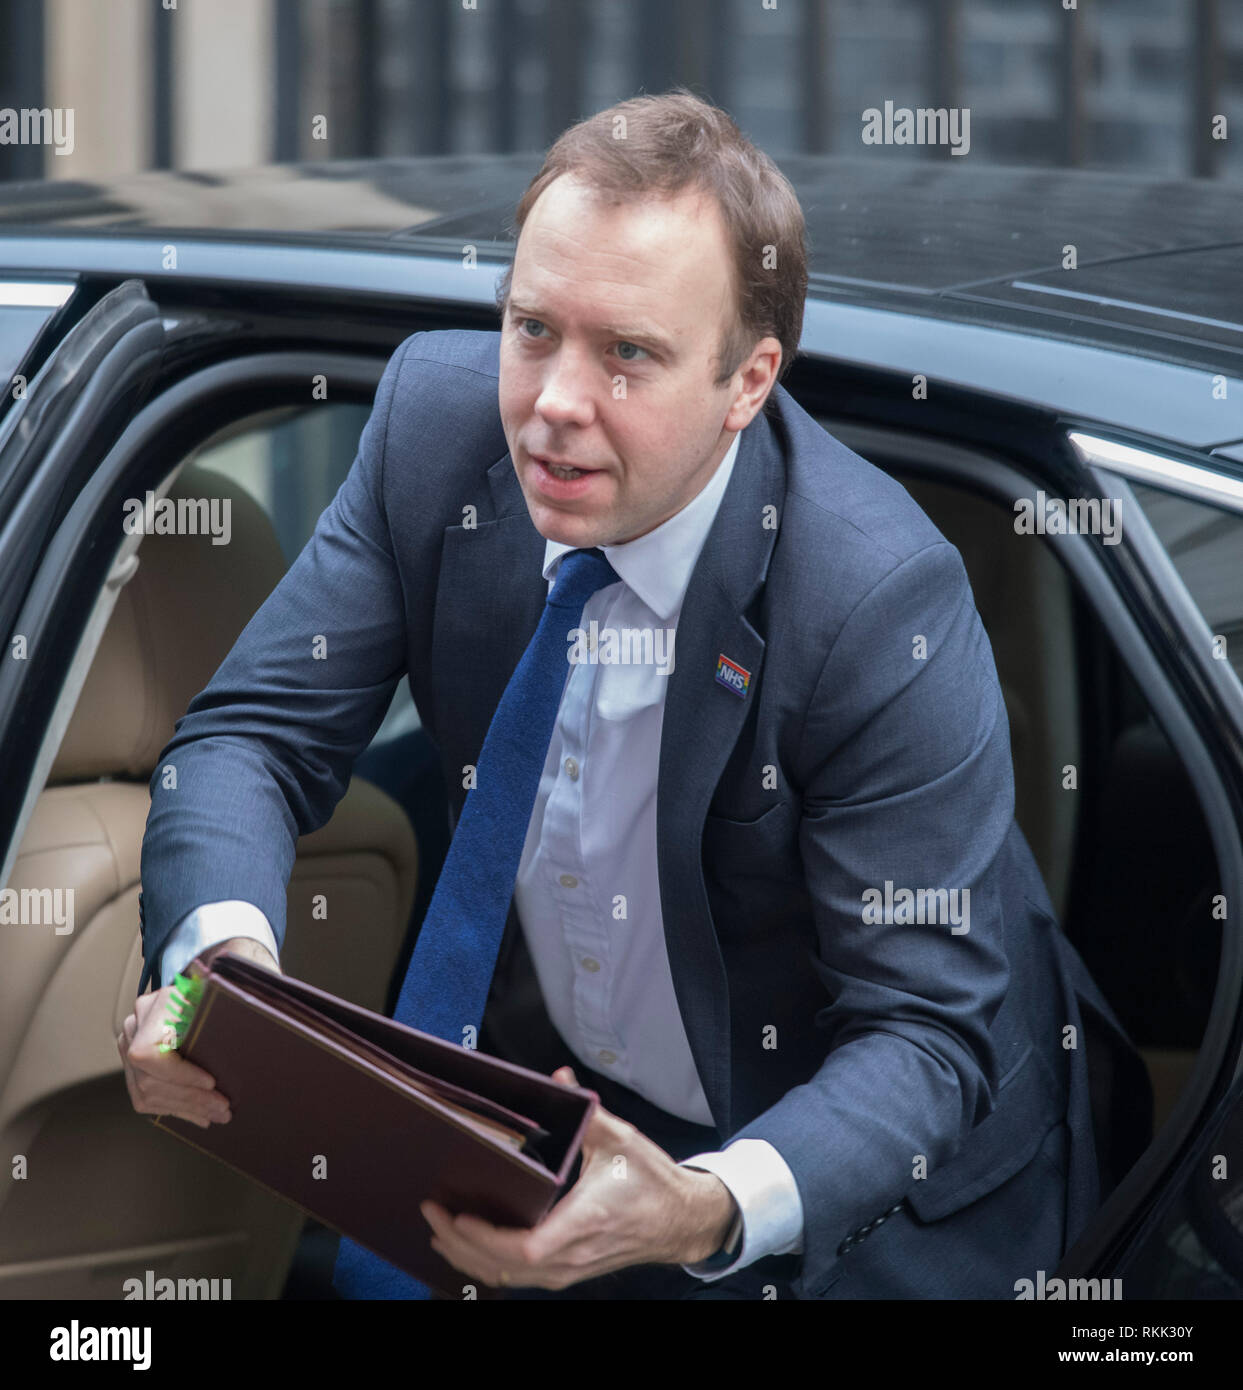 Downing Street, London, UK. 12 February 2019. Government Ministers arrive in Downing Street for weekly cabinet meeting. Matt Hancock, Secretary of State for Health and Social Care. Credit: Malcolm Park/Alamy Live News. Stock Photo